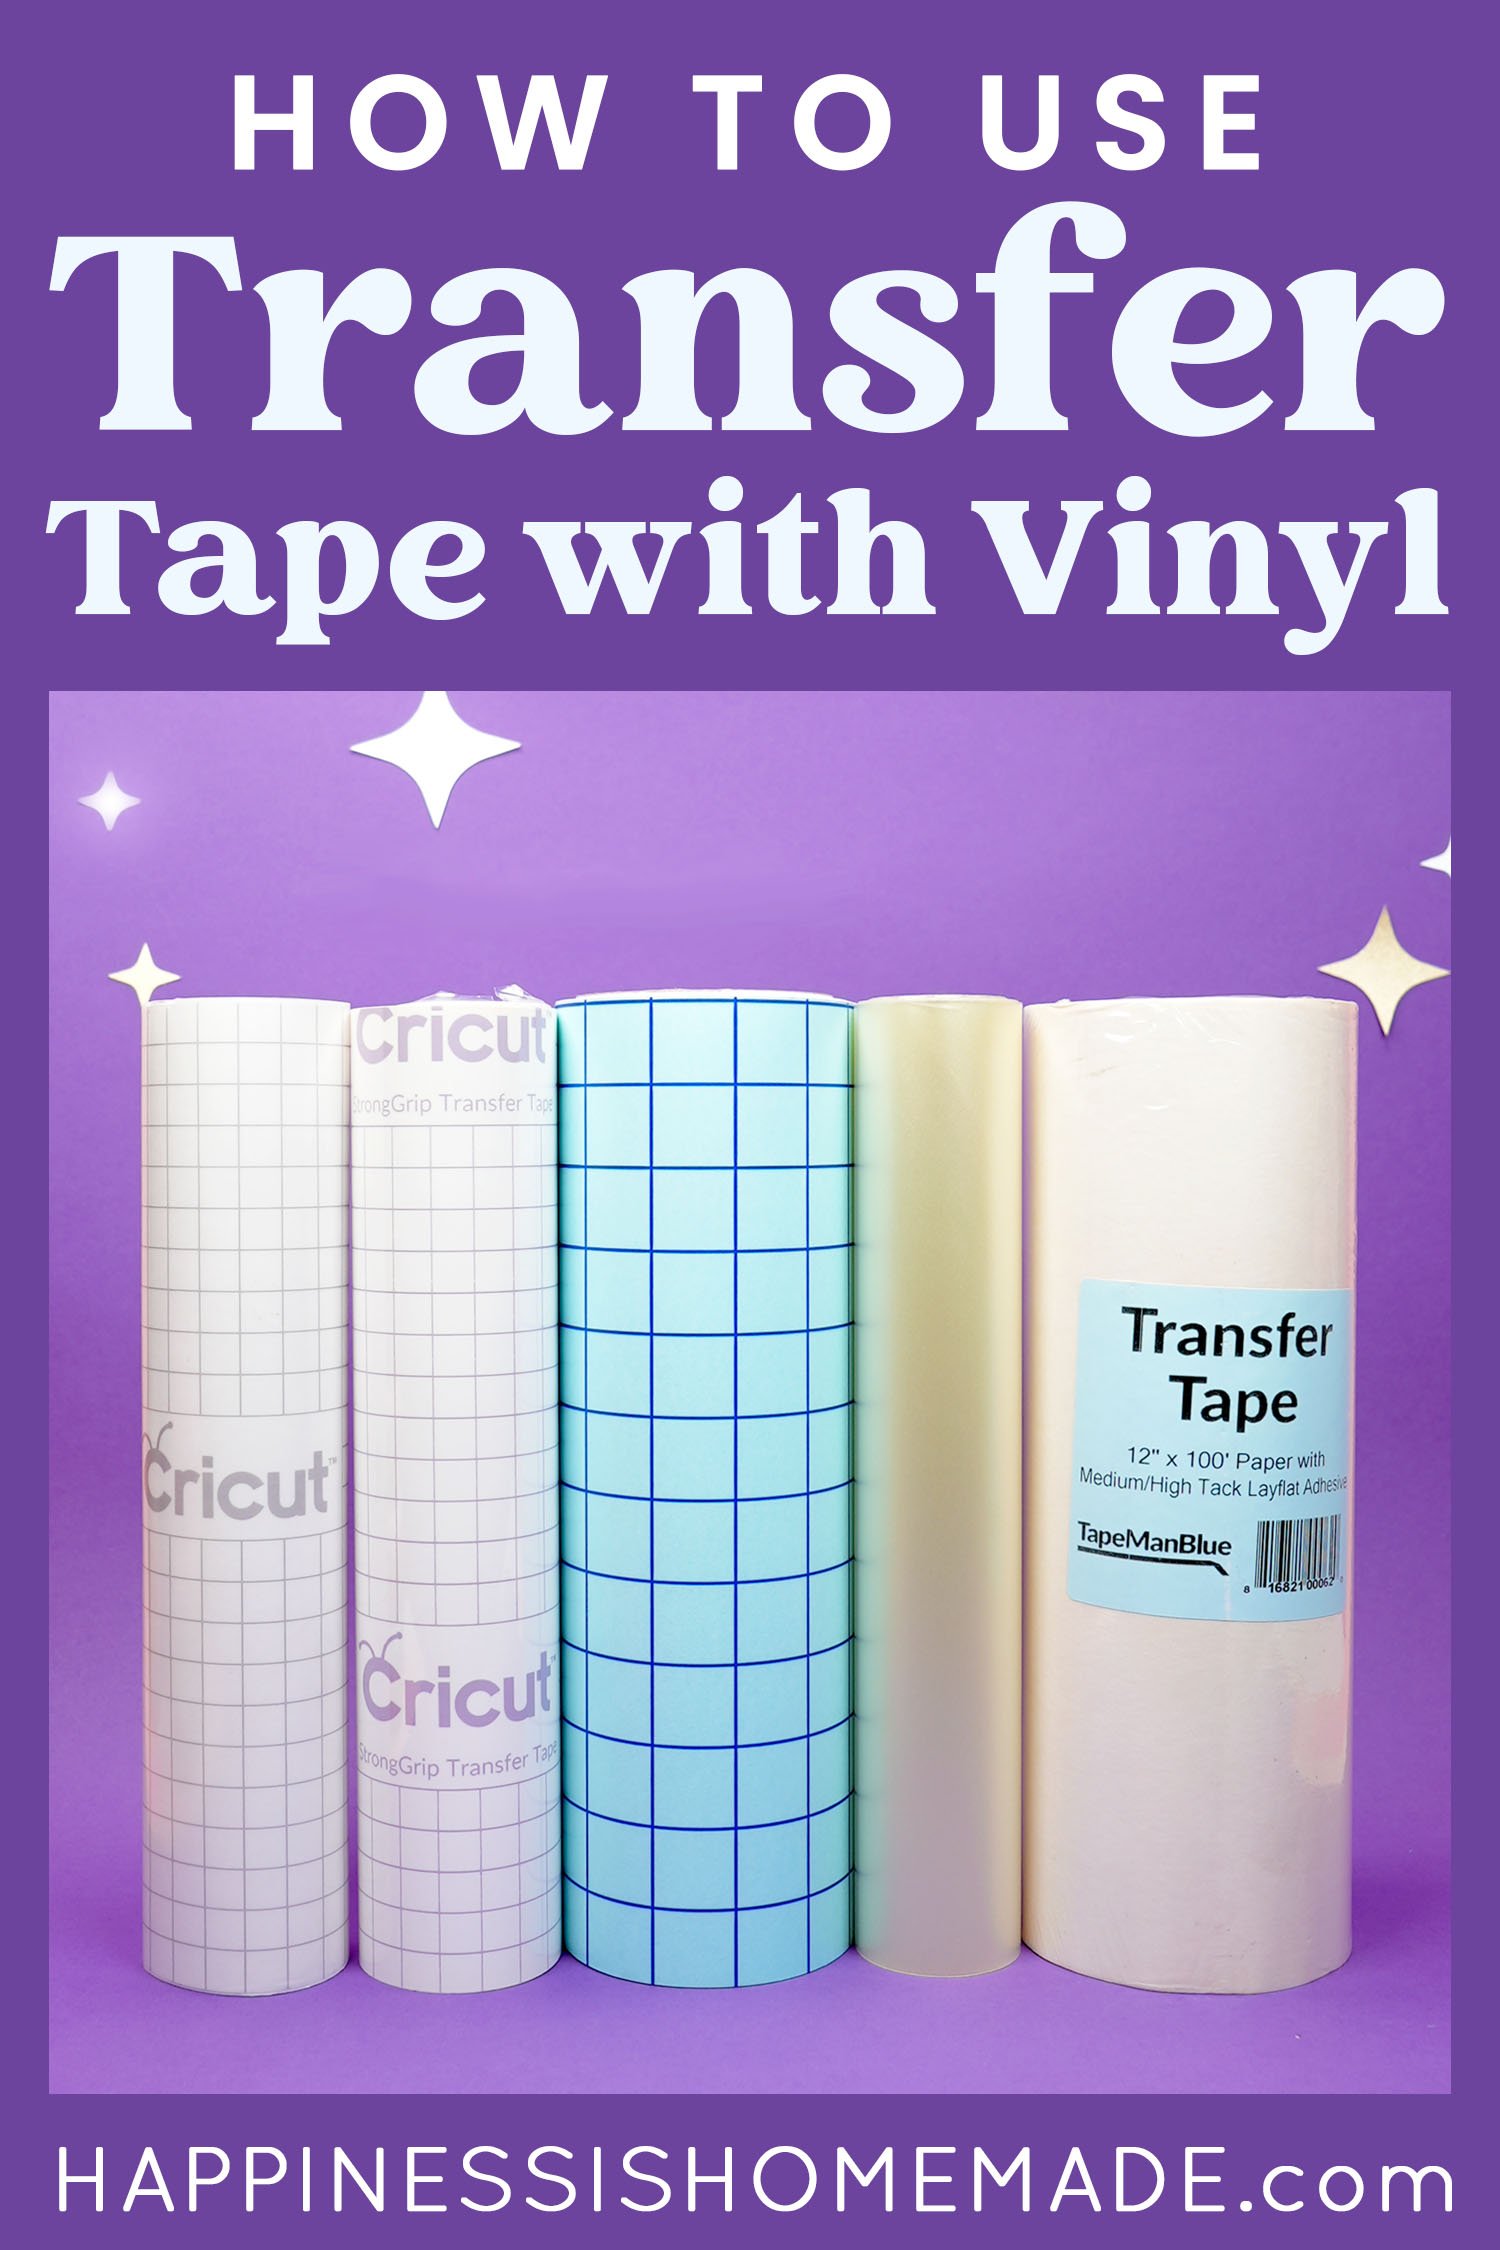 How to Use Transfer Tape with Vinyl